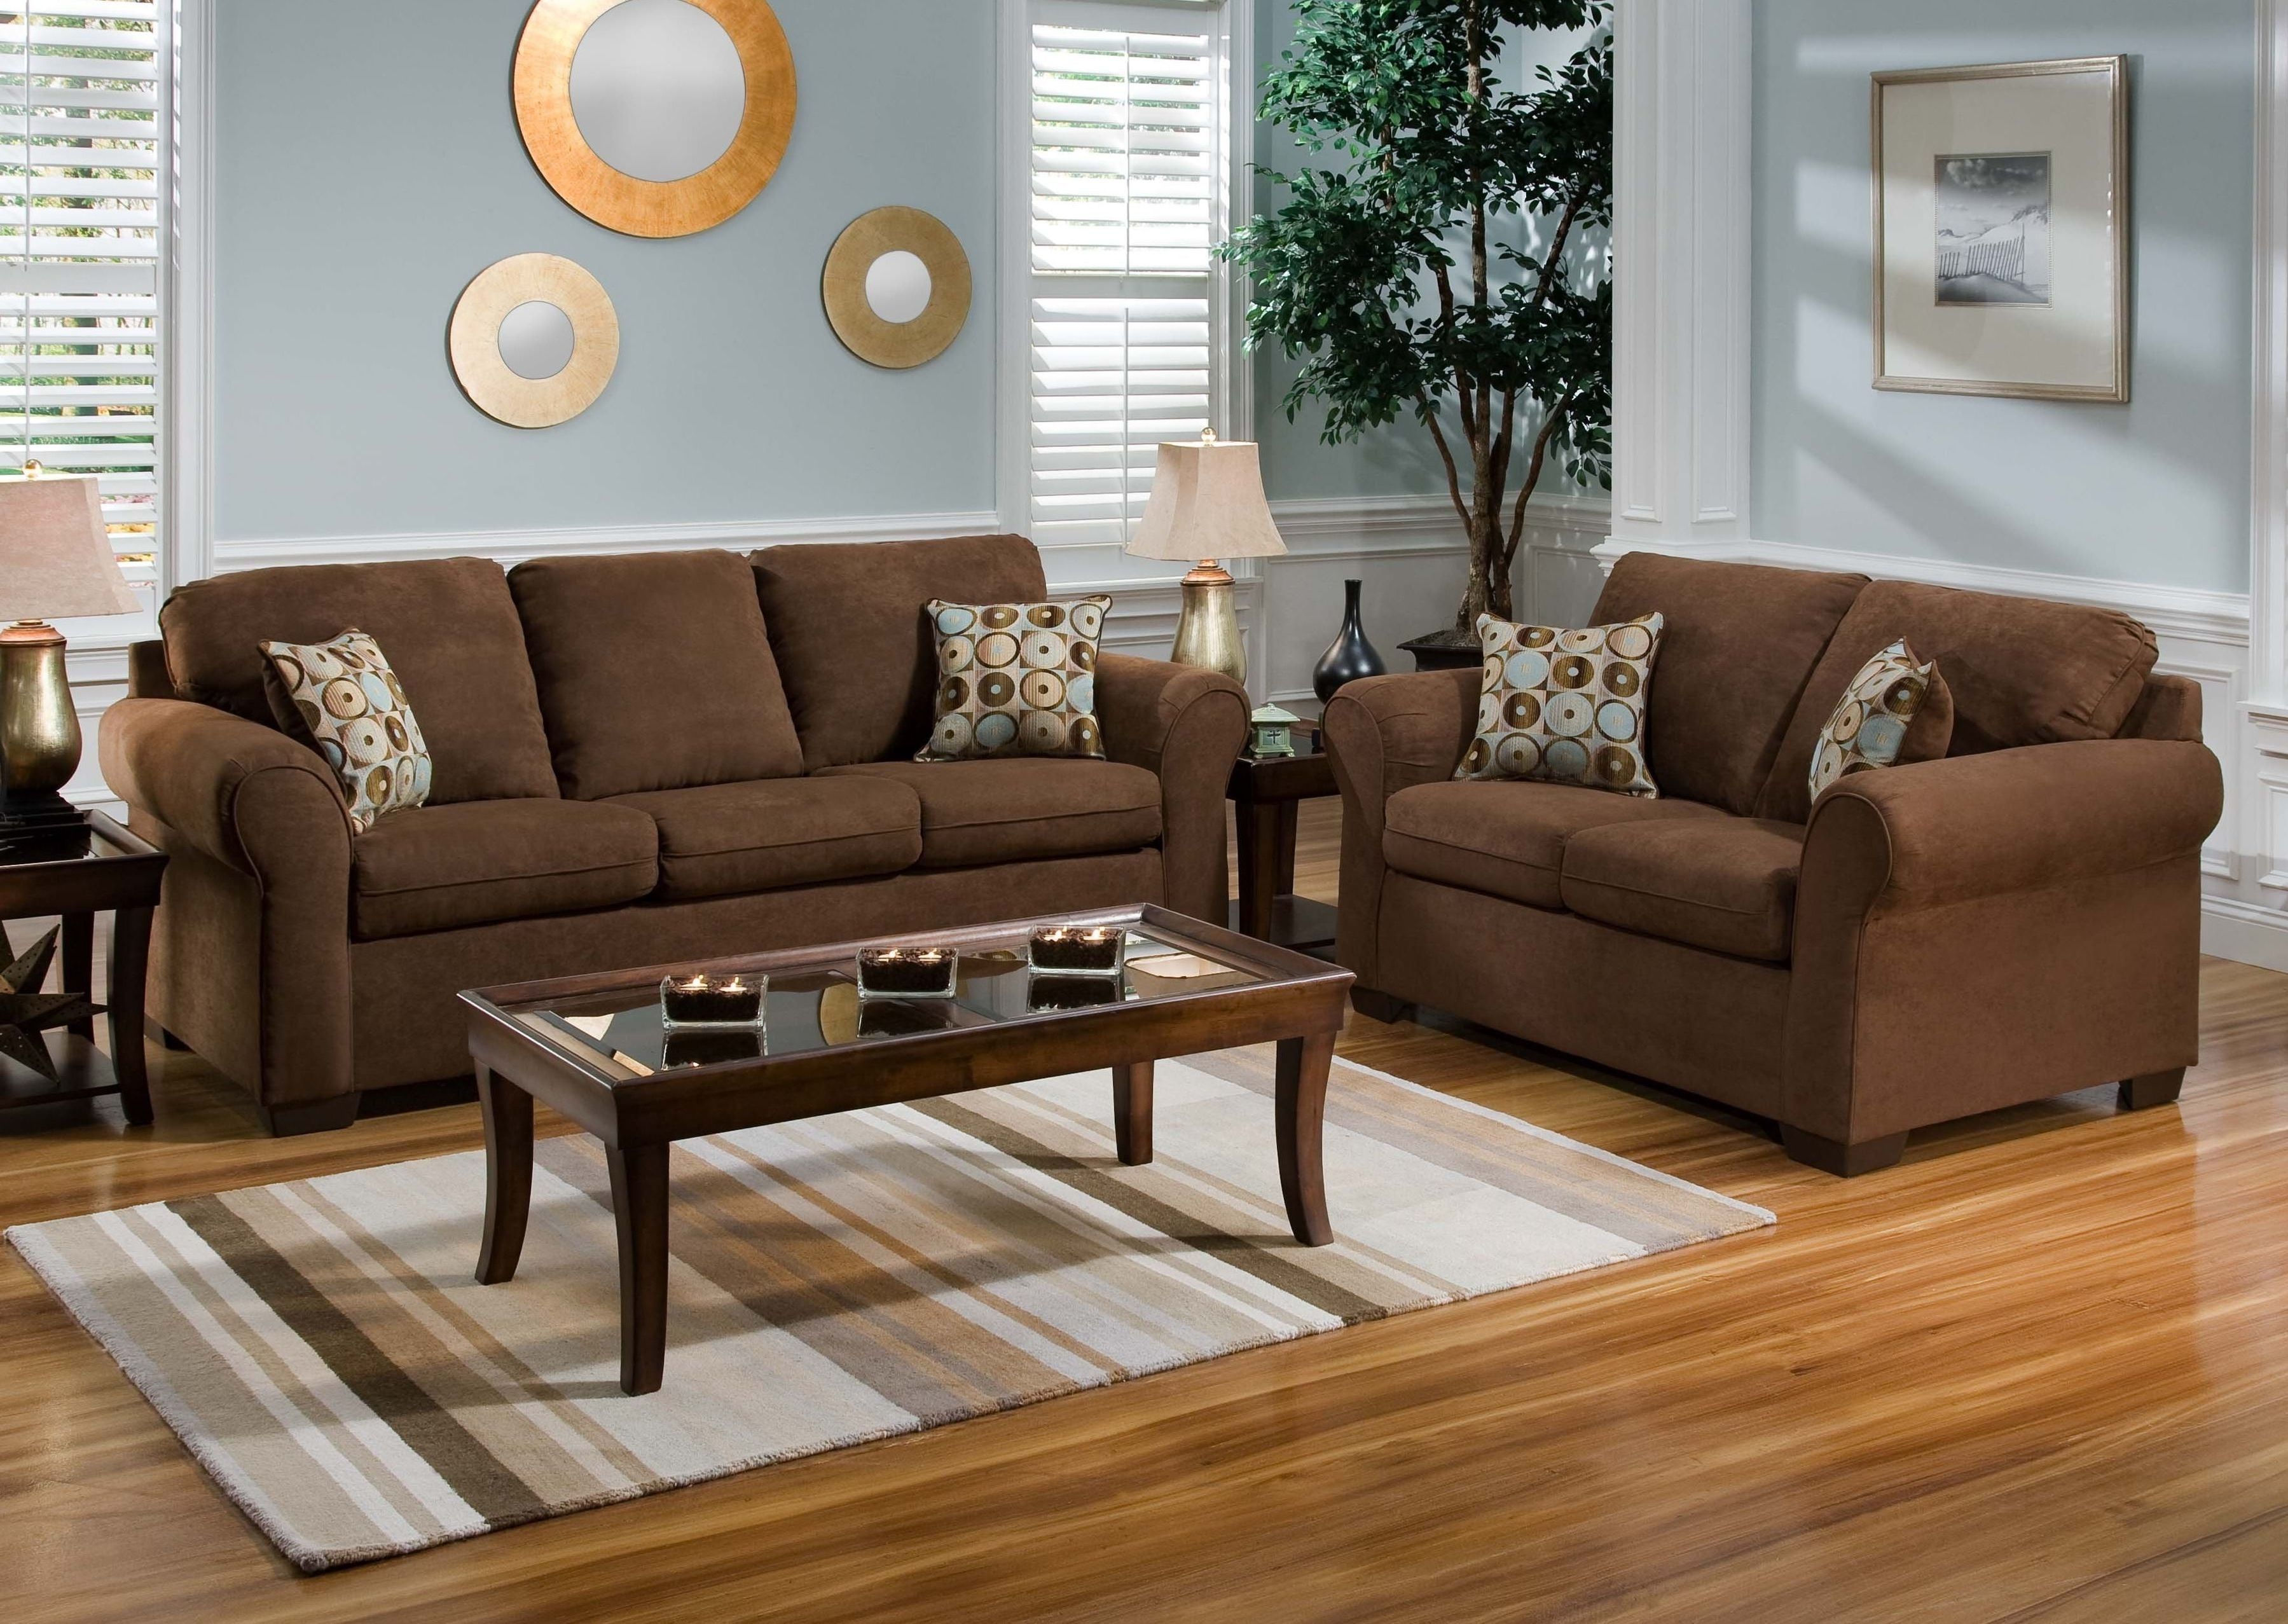 Brown Leather Couches In Living Room